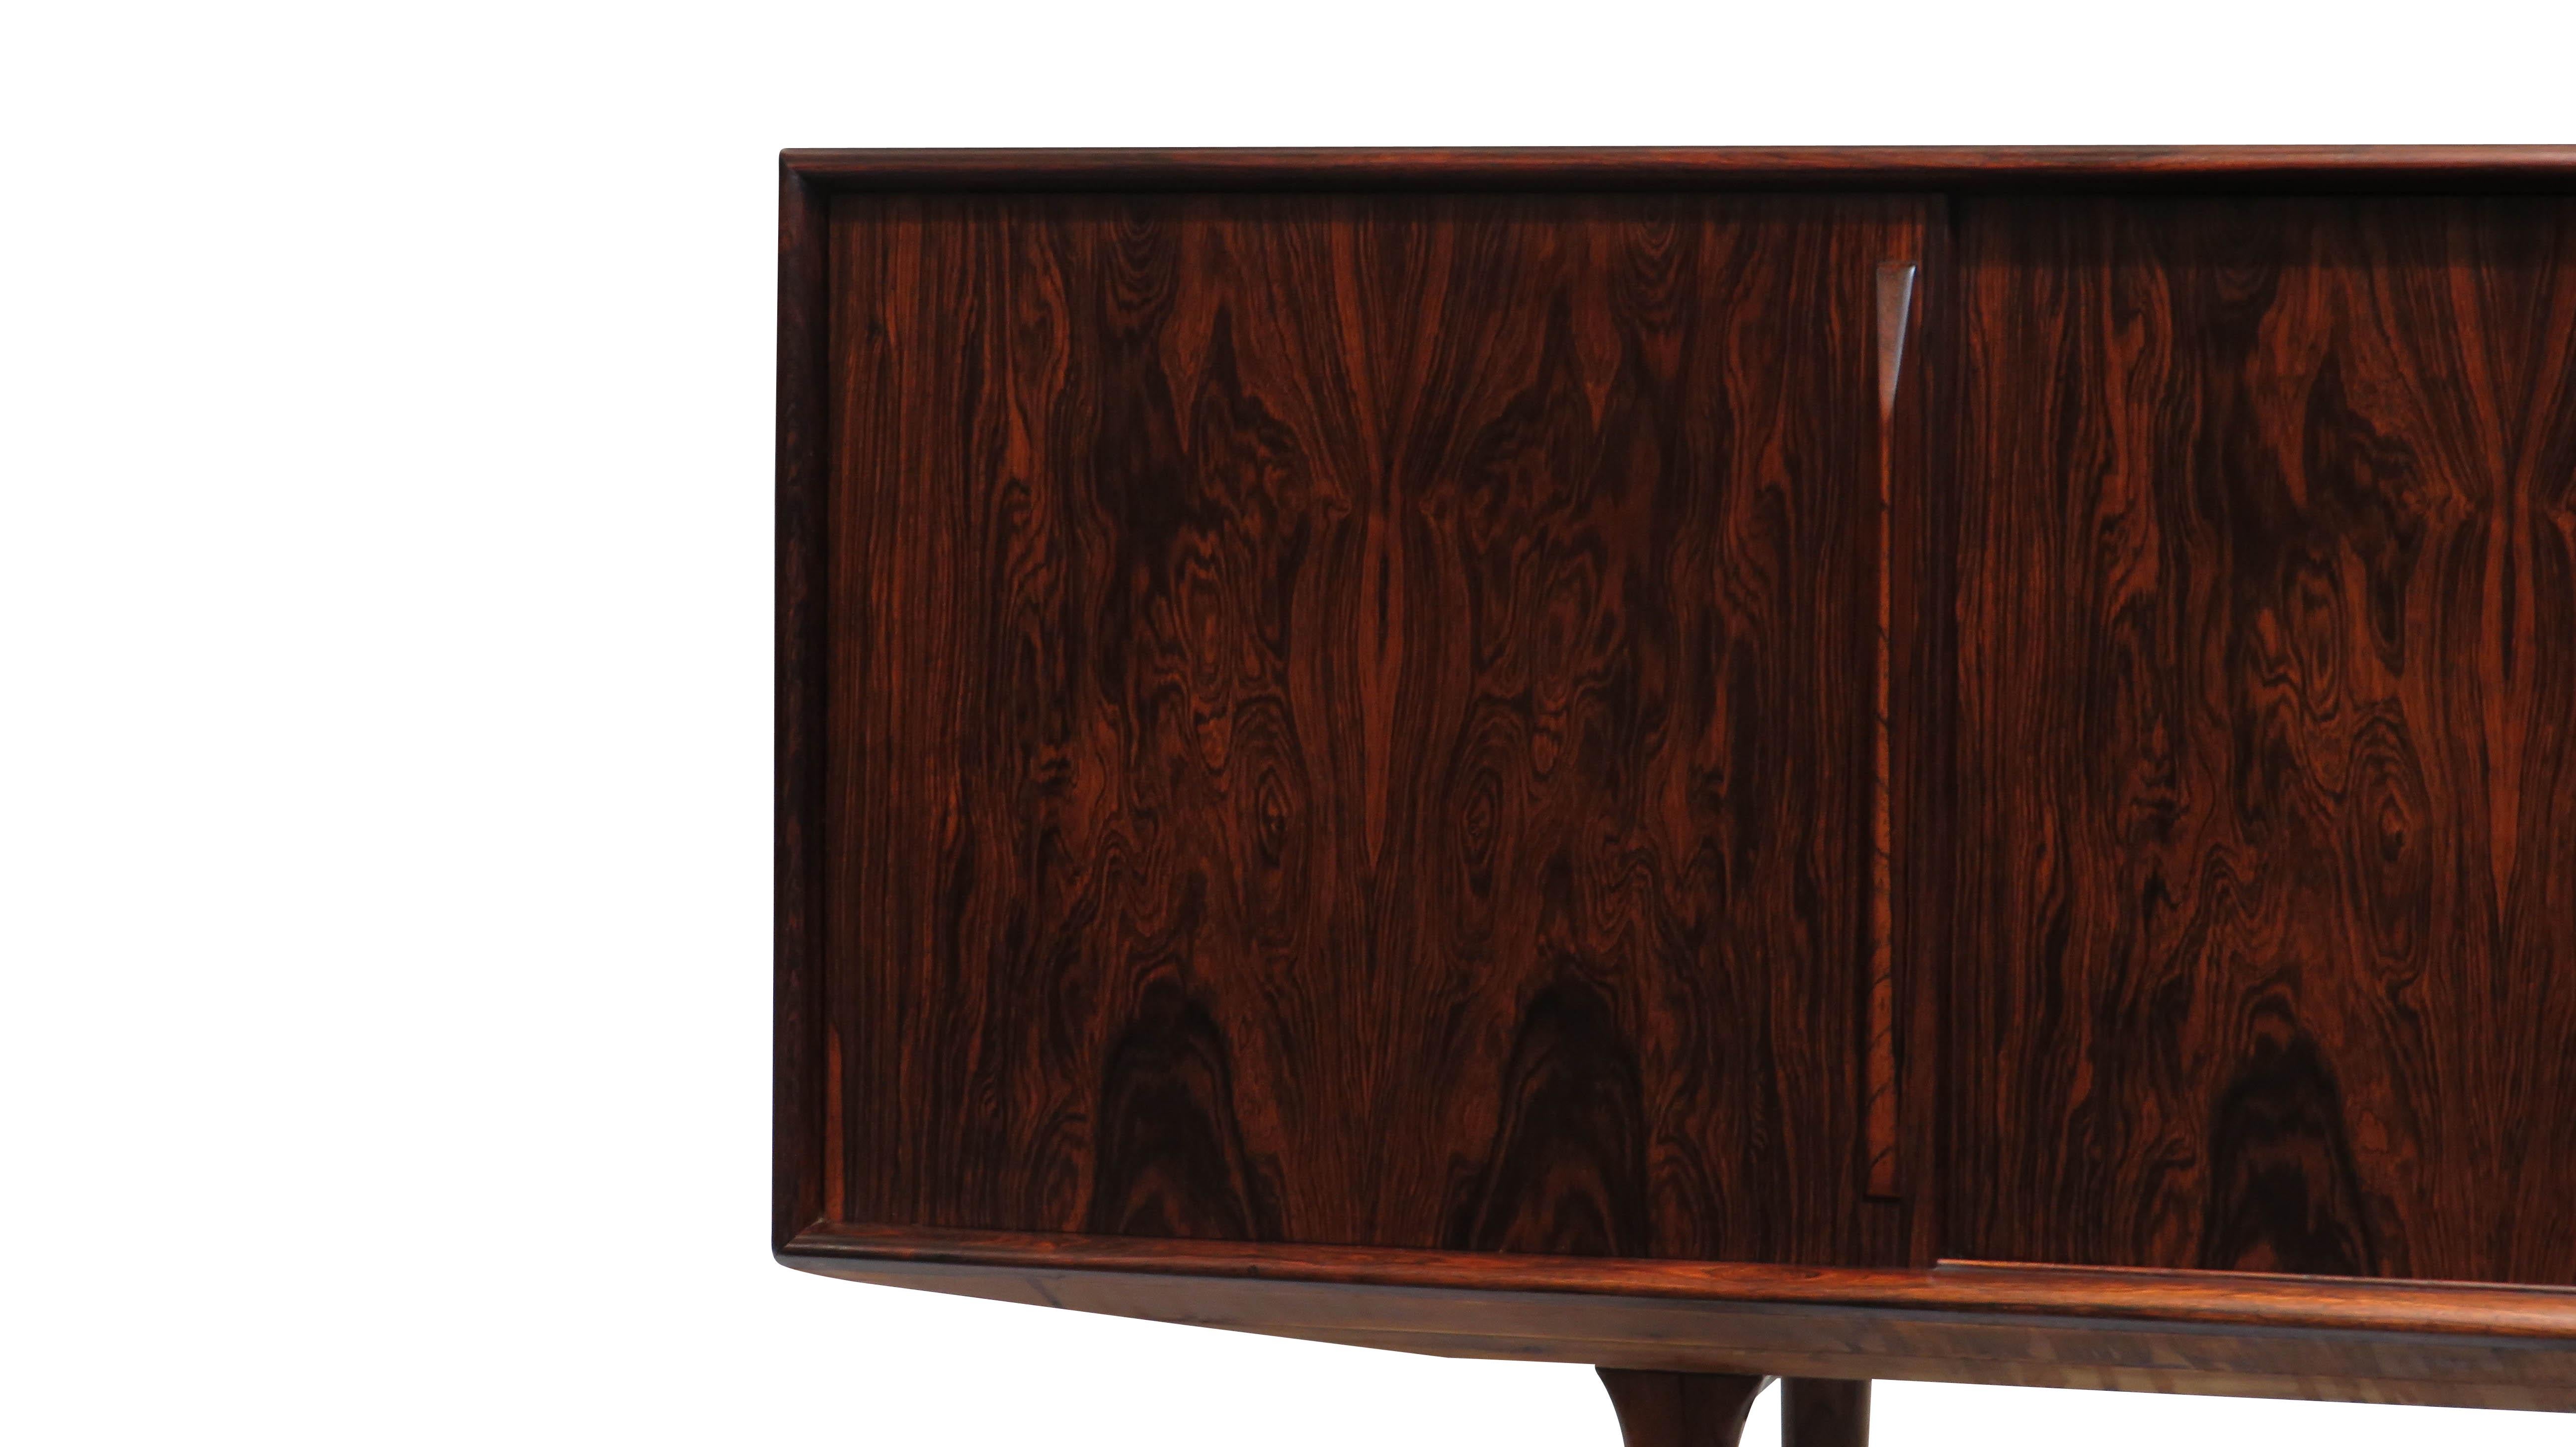 Danish credenza handcrafted of dark Brazilian rosewood with stunning book-matched grain on four sliding doors. Beech wood interior with adjustable shelves. Raised on tapered legs. The cabinet is fully restored in a natural oil finish, and in